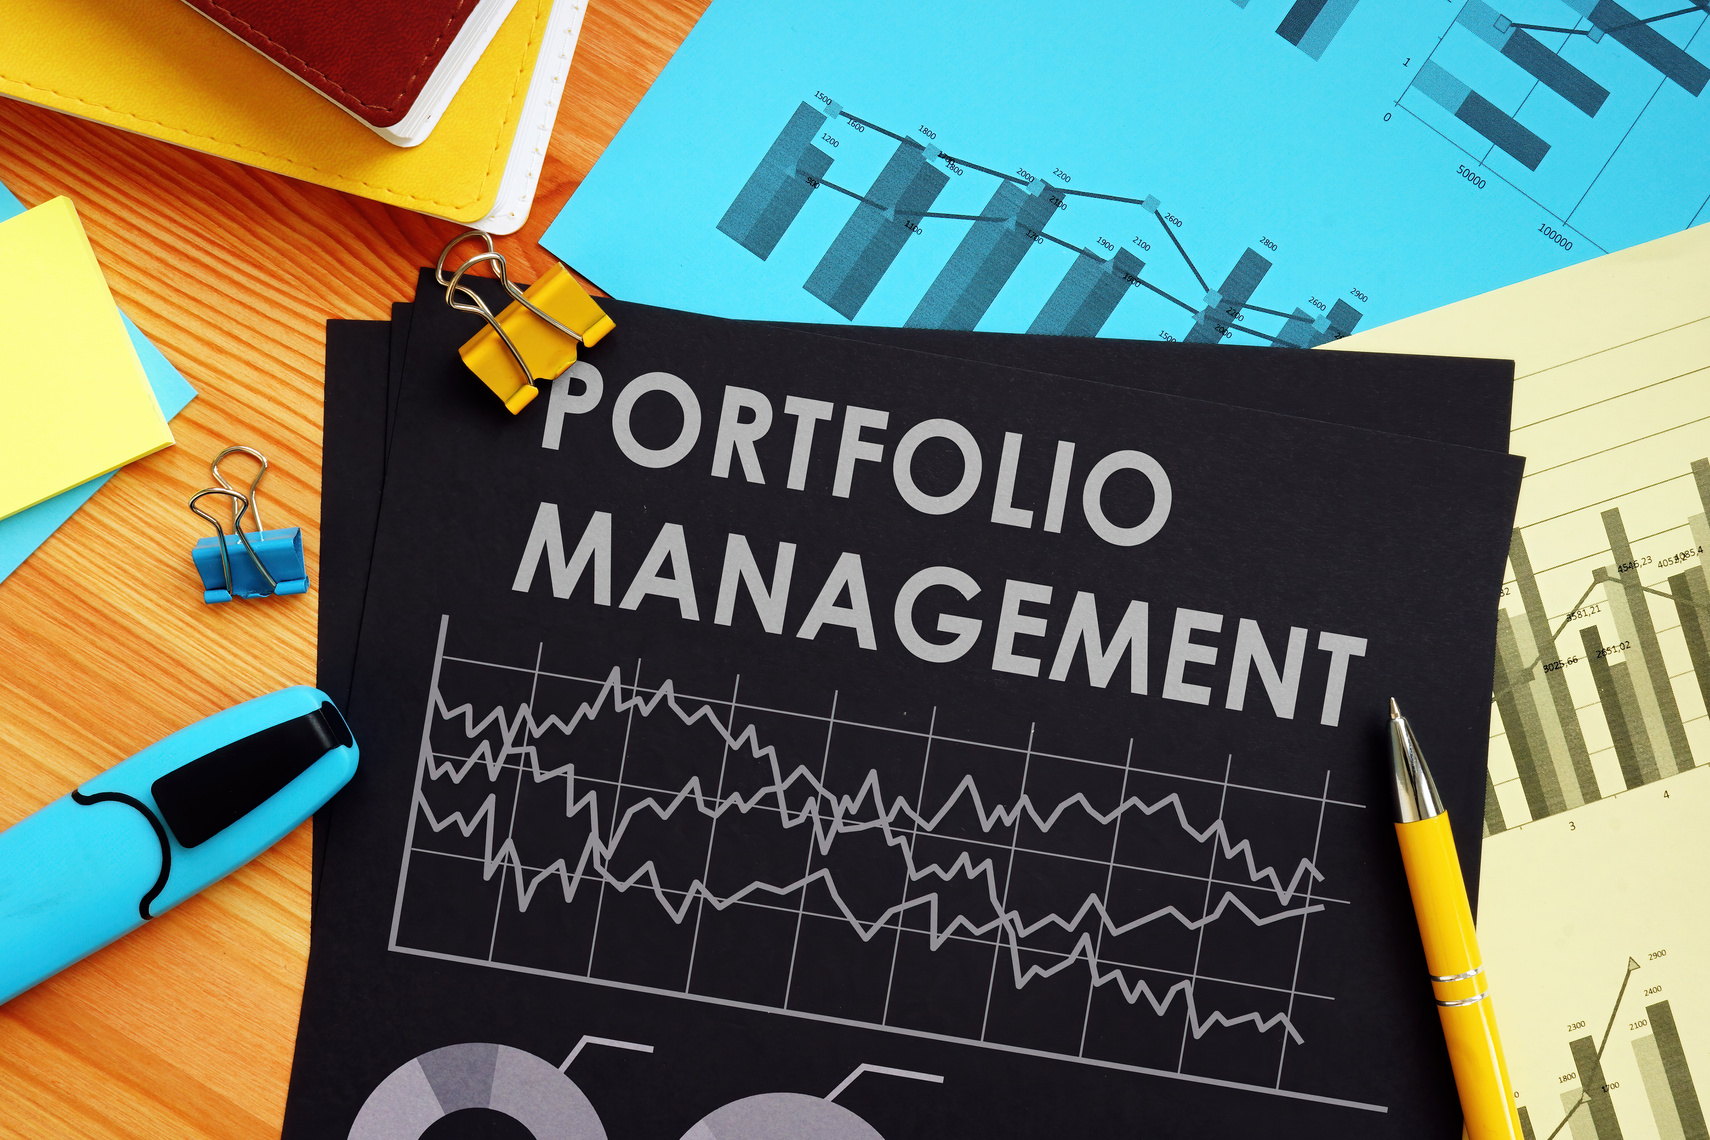 Portfolio management report with data and financial charts.